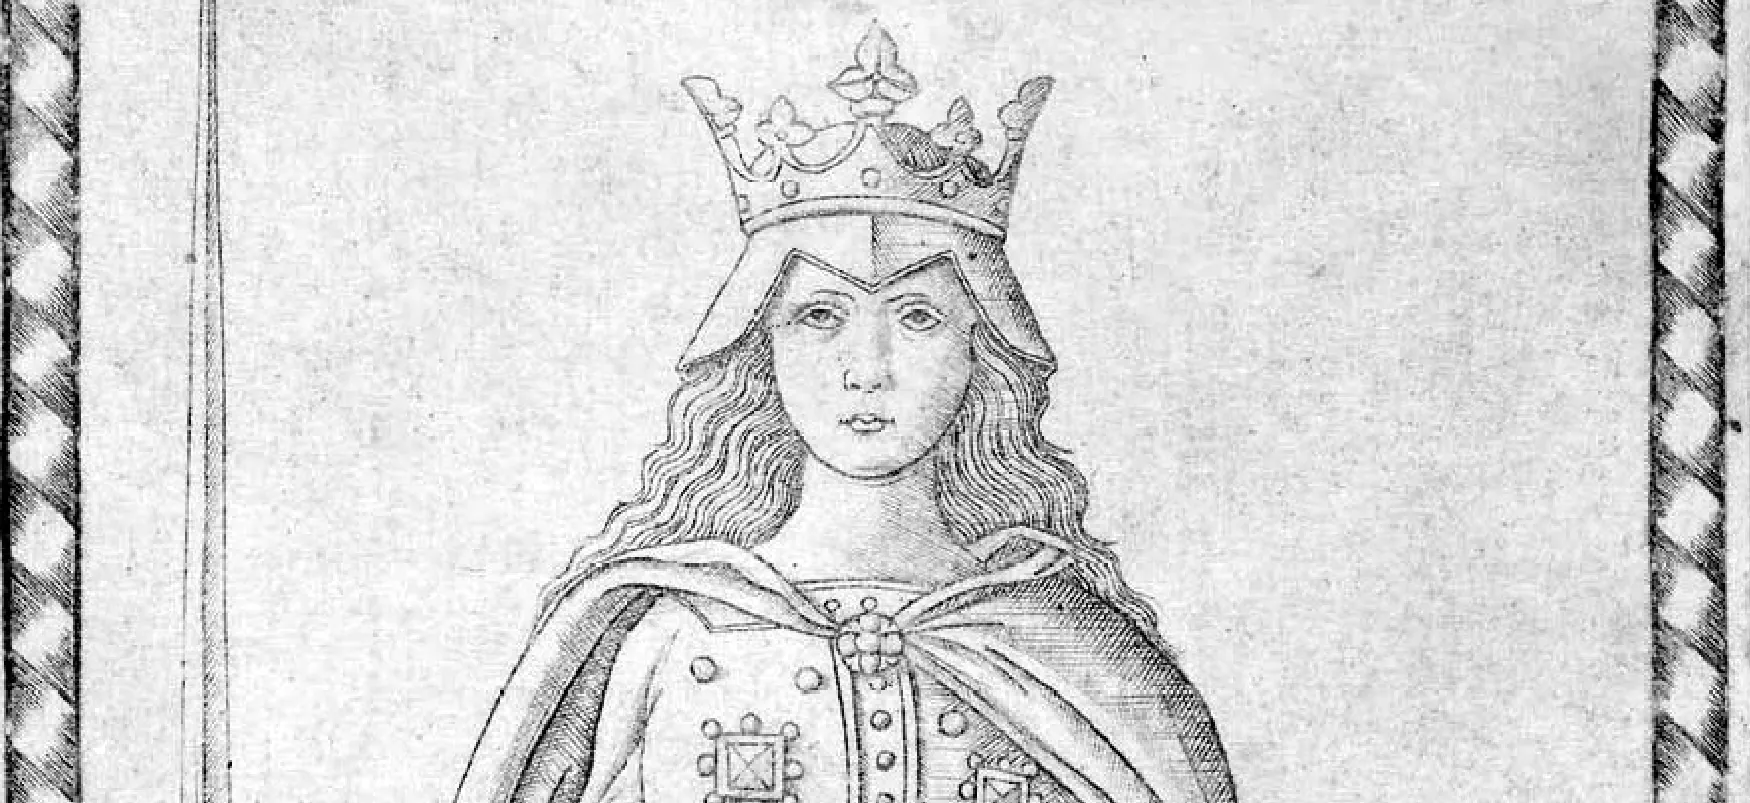 An engraving of a queen by an unknown Italian artist from the 15th century personifies rhetoric as eloquence or “discourse marked by force and persuasiveness.”